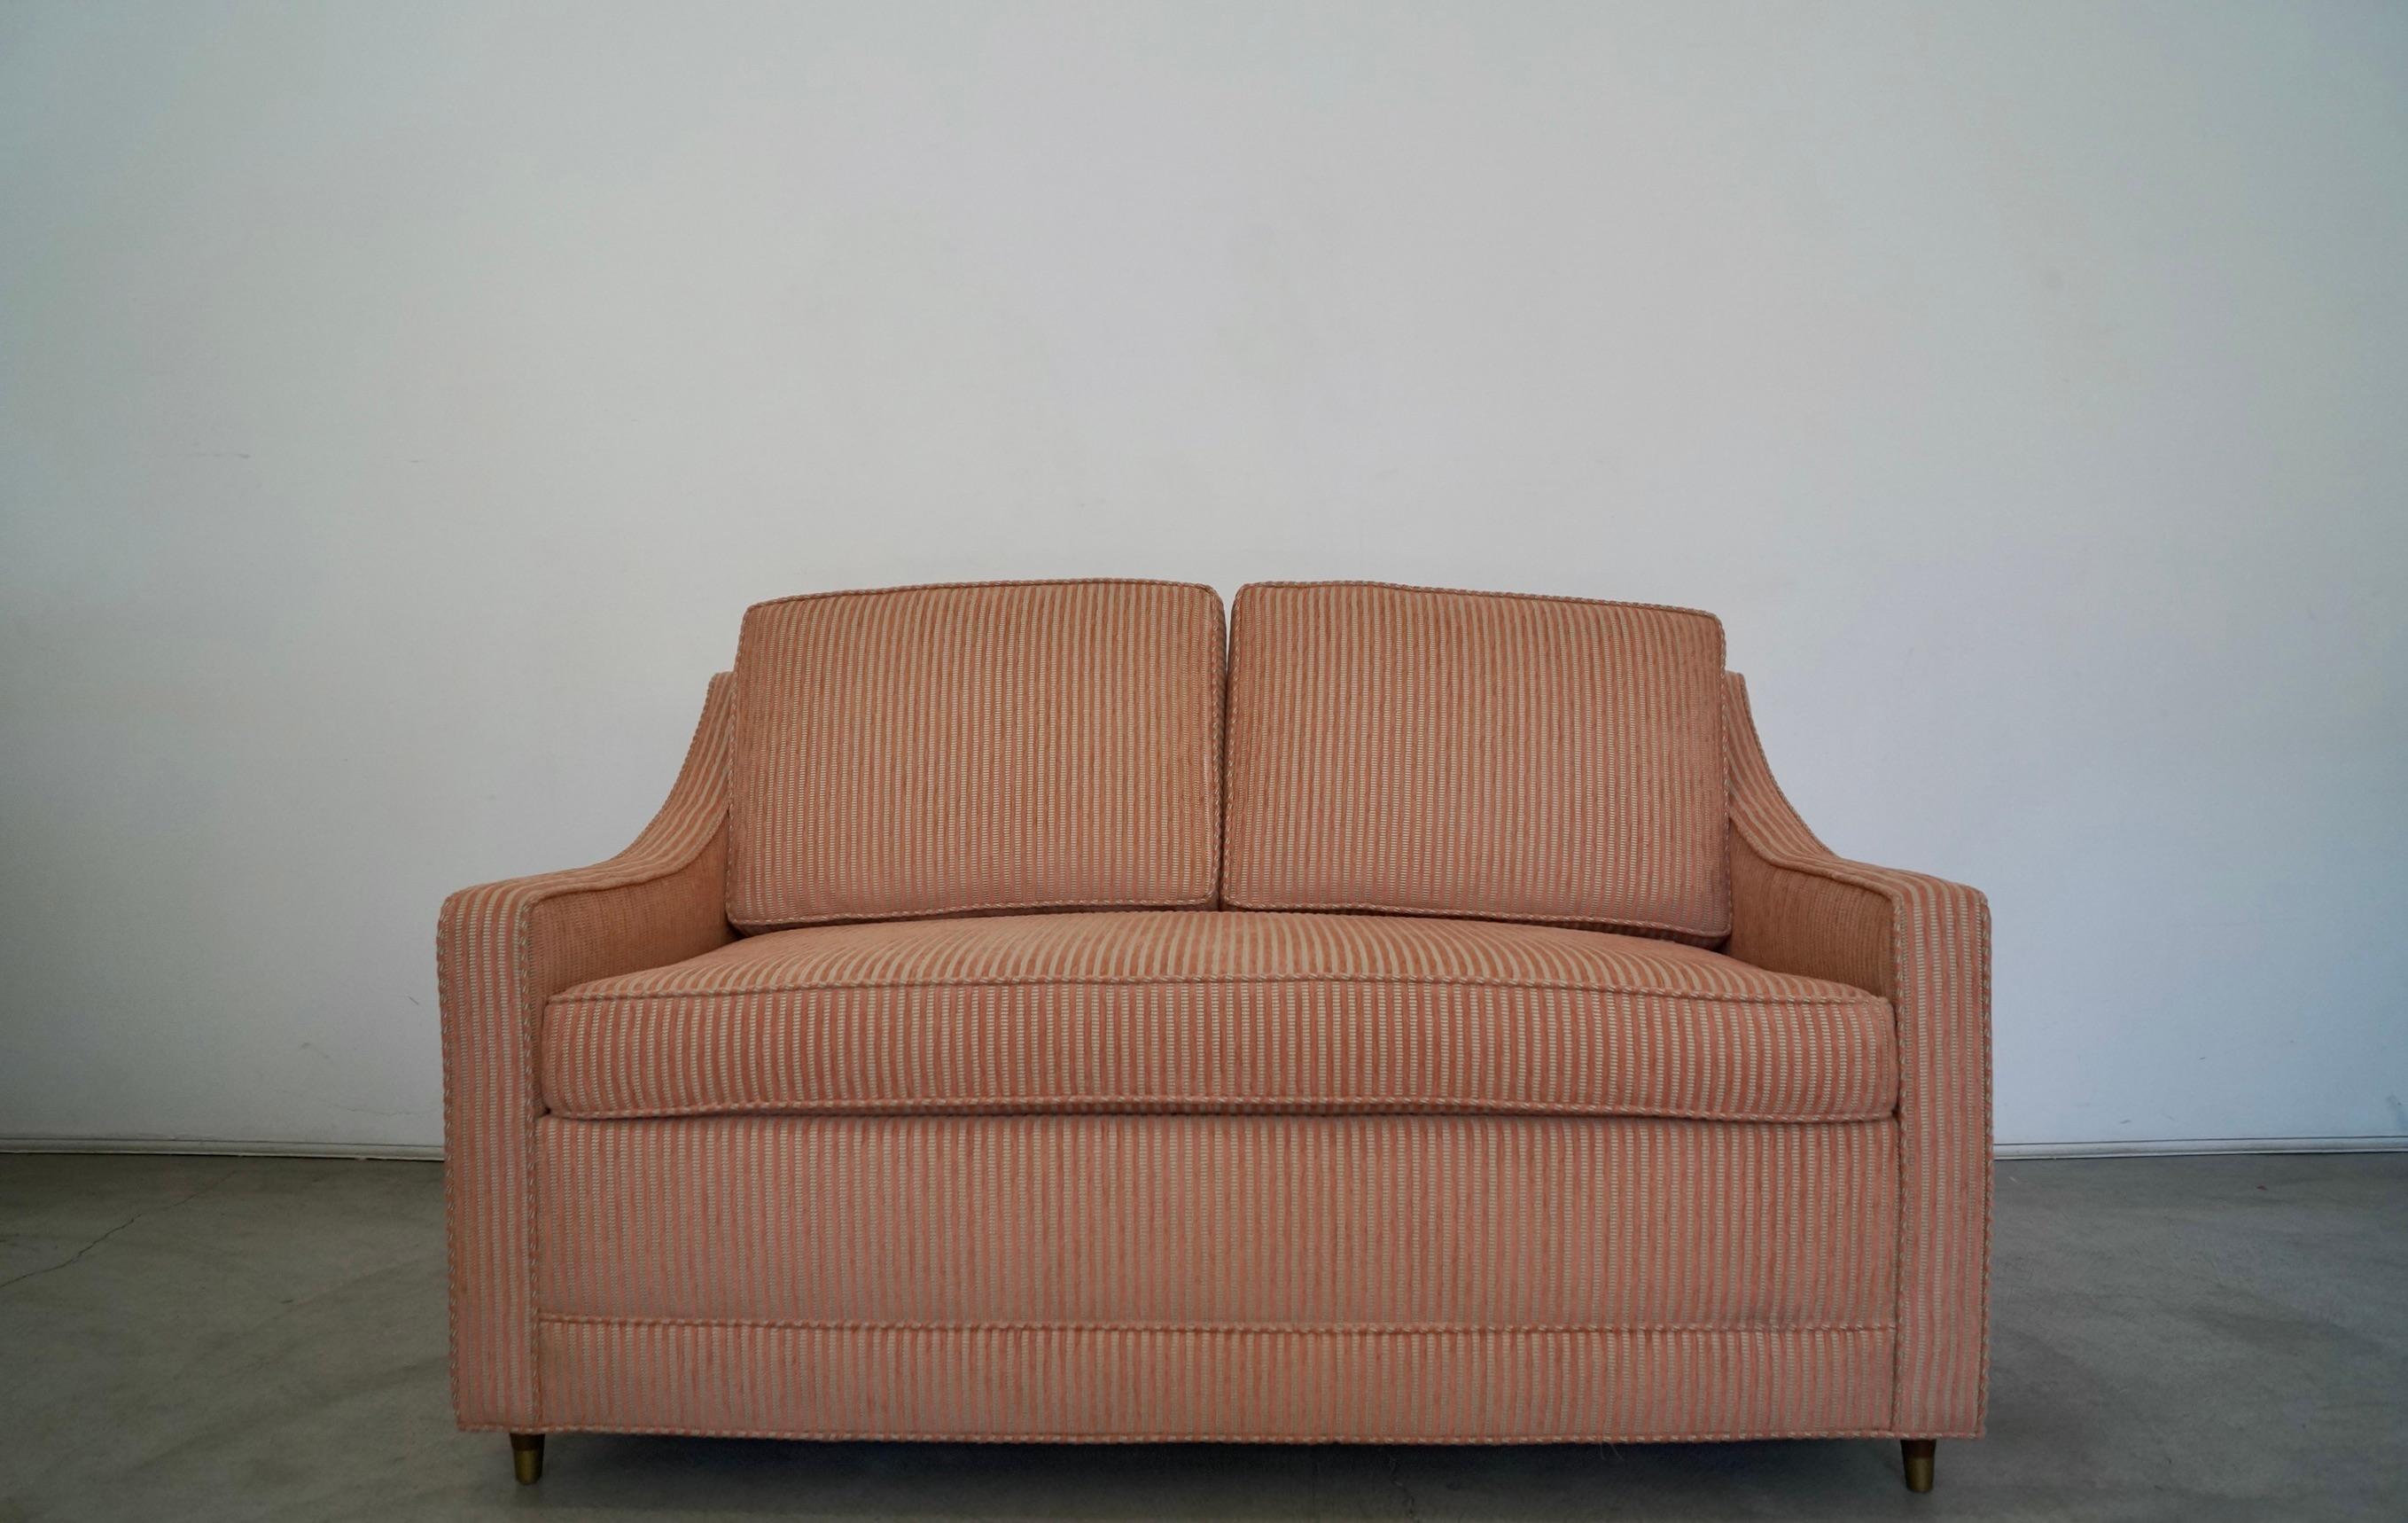 Vintage Mid-Century Modern sofa sleeper for sale. Original 1960s, and has been professionally reupholstered in a striped soft chenille velvet. The raised stripes are pink, and it has gray, coral, and silver. The metal pullout mechanism and mattress